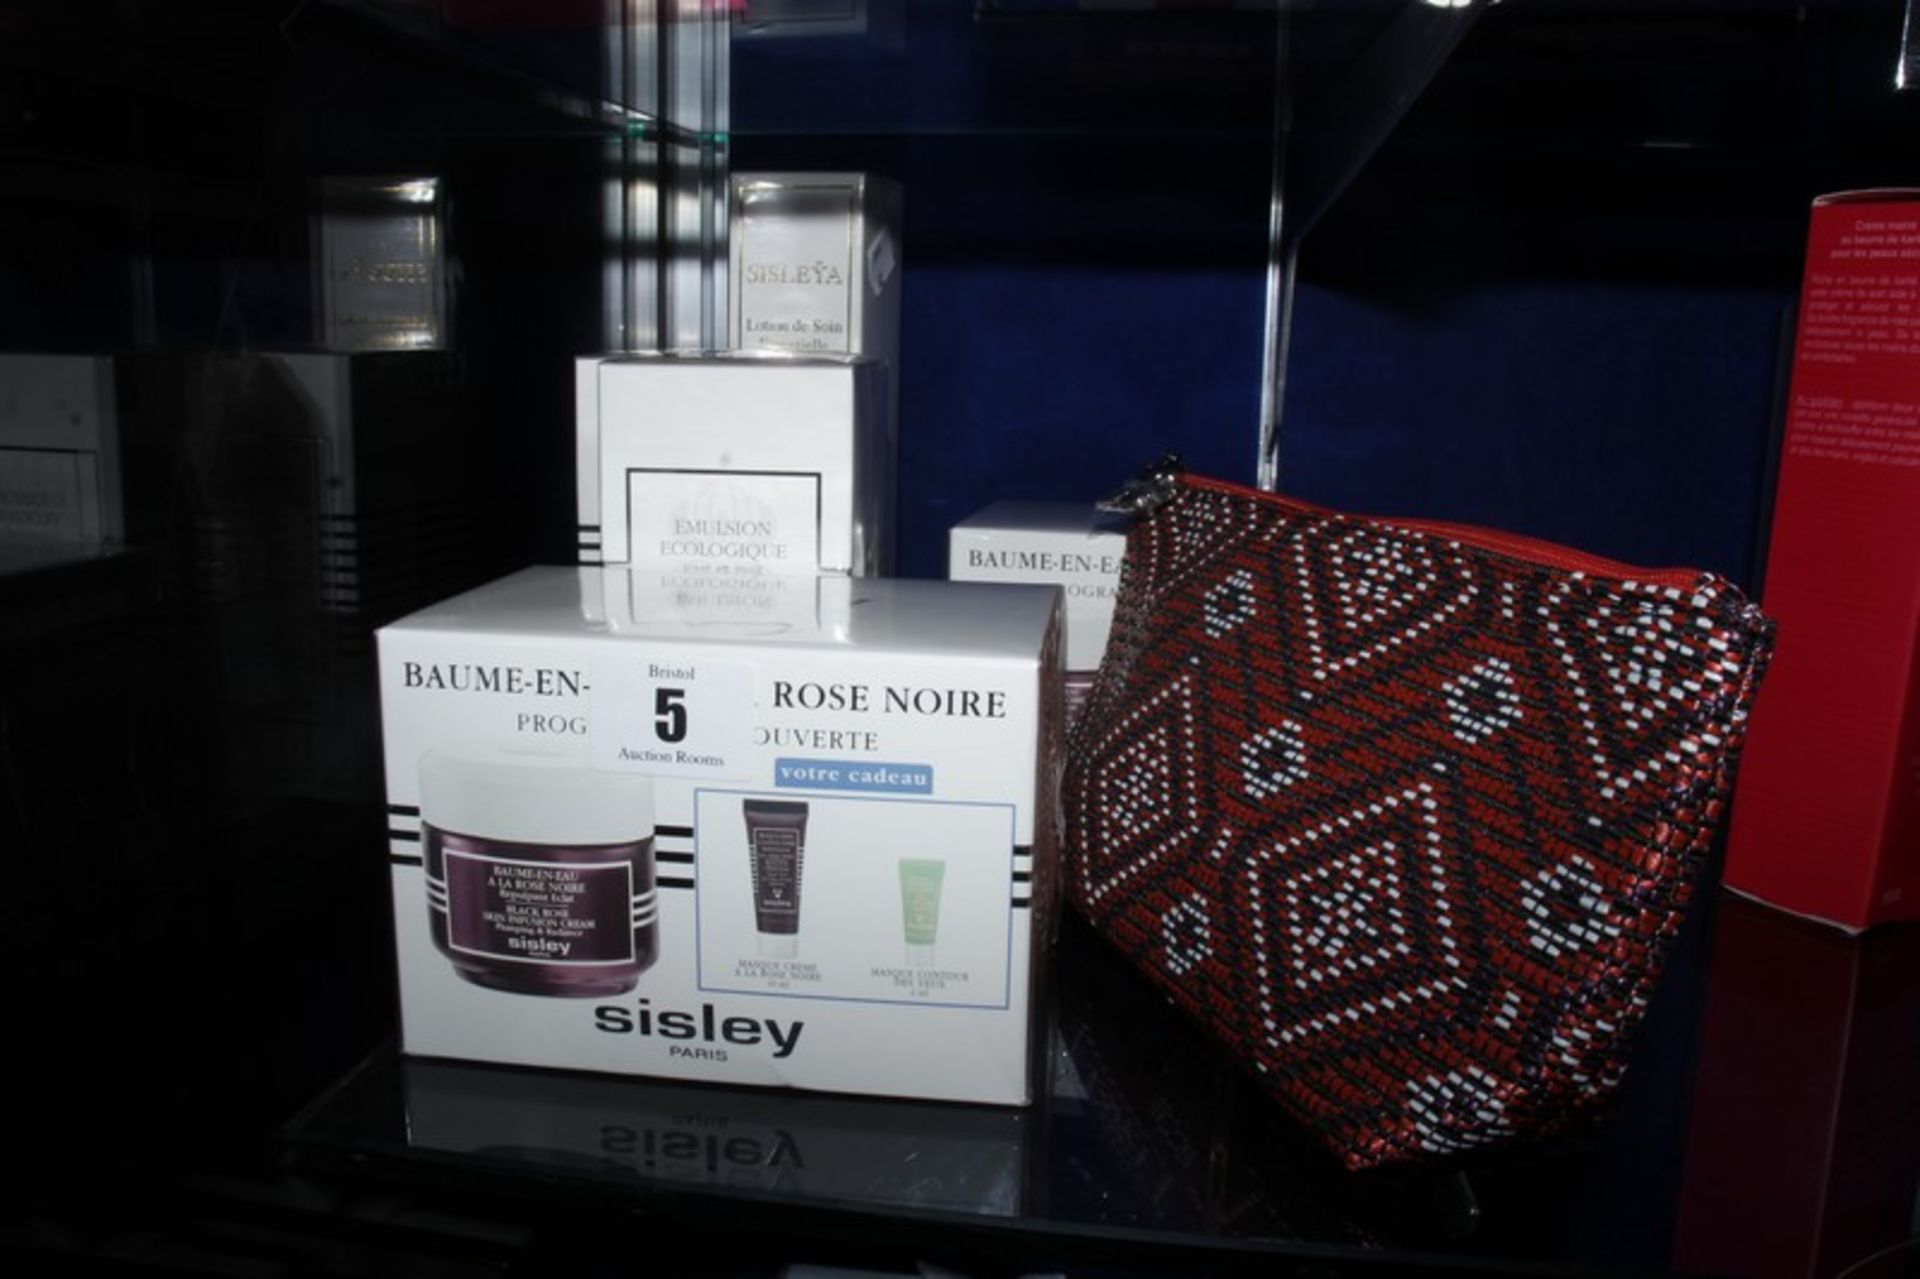 Two Sisley as new Black Forest Infusion cream discovery programs, two Sisley Ecological compound day